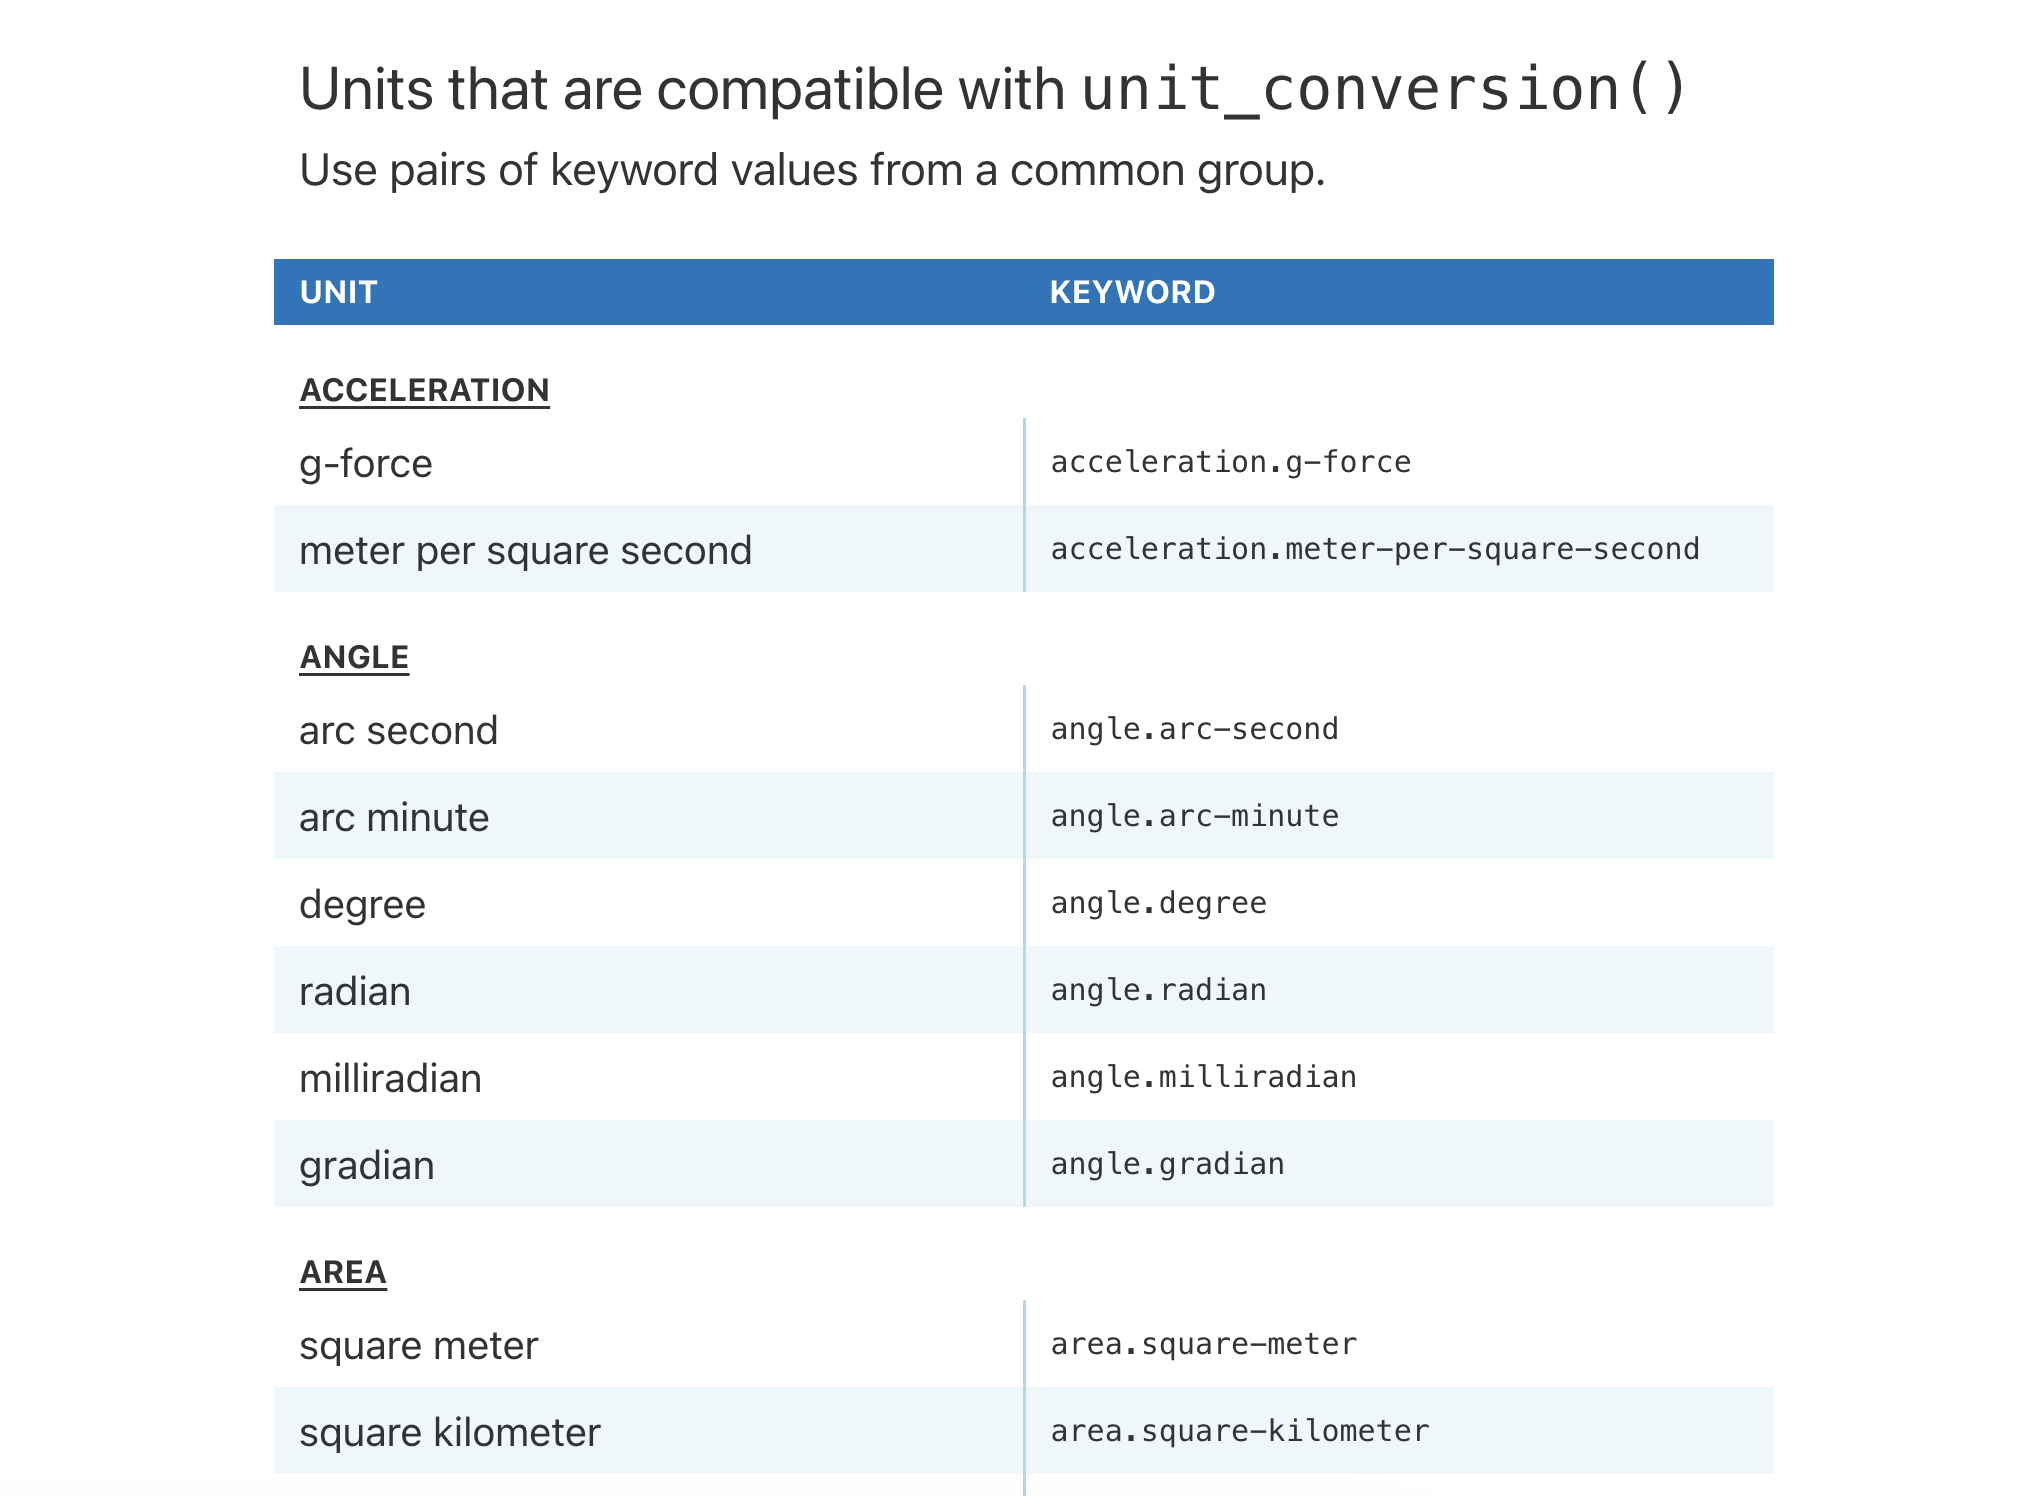 This image of a table was generated from the first code example in the `info_unit_conversions()` help file.